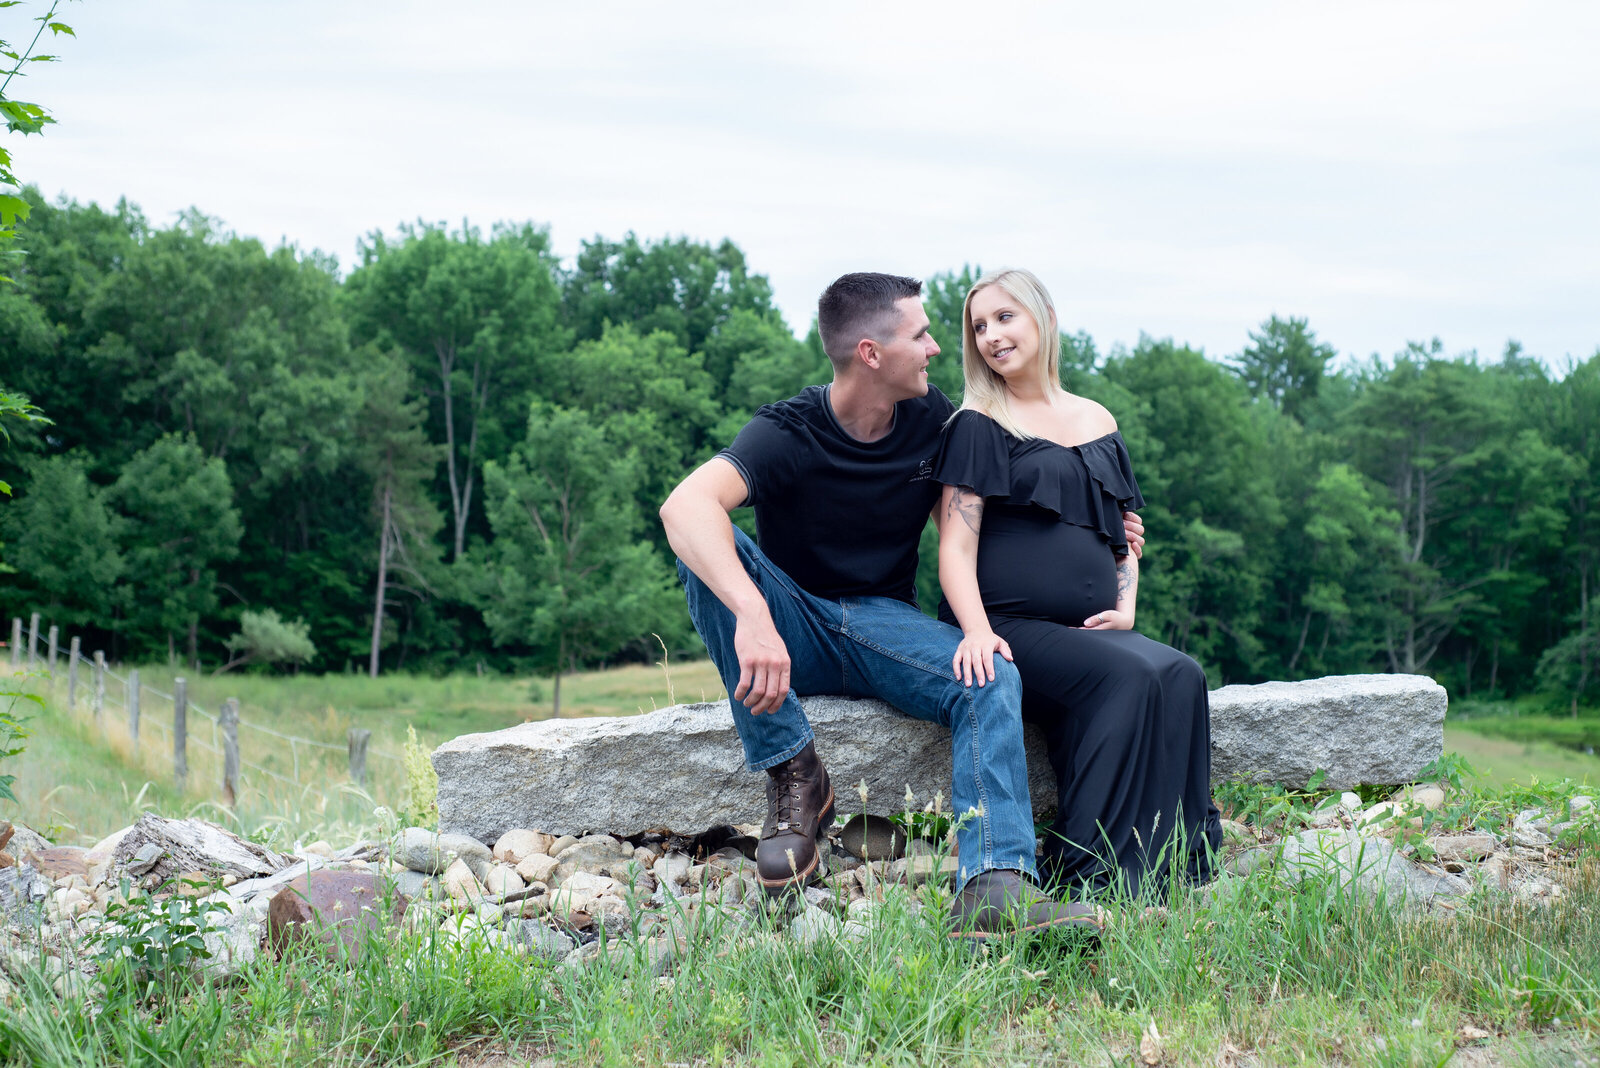 Couple in maternity photo in country setting